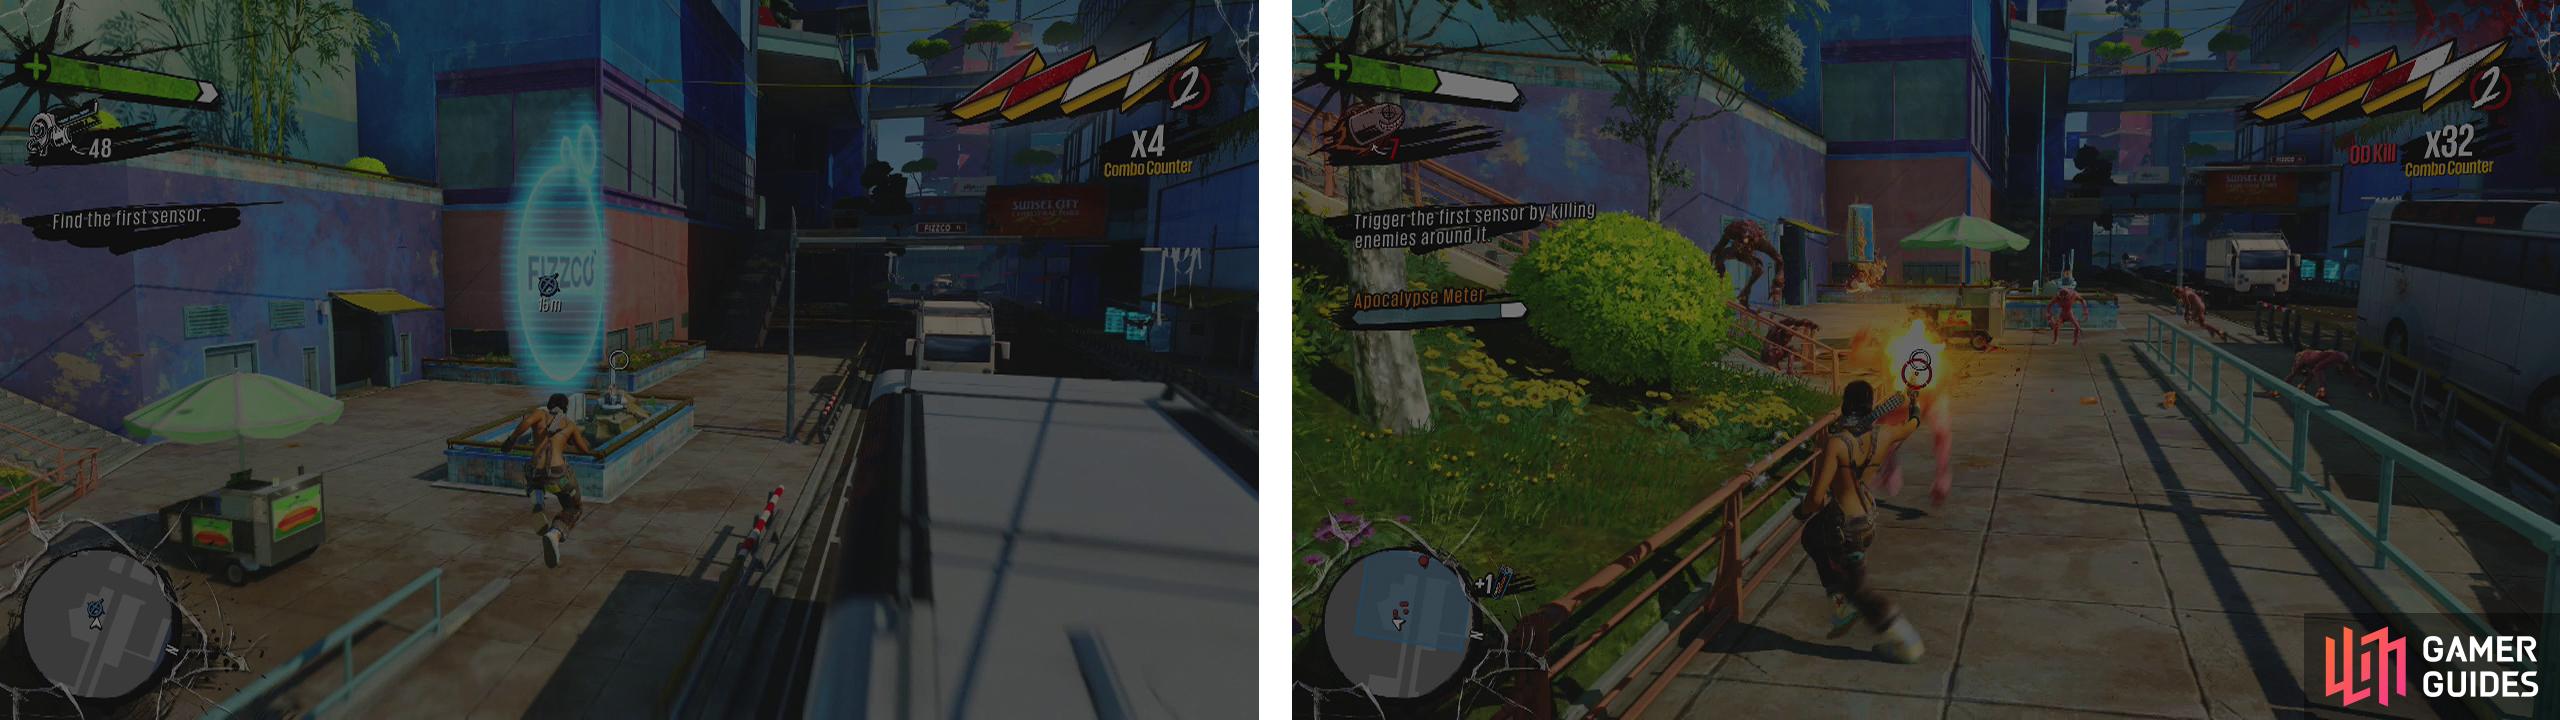 Interact with the sensor/s (left) and then kill enemies to build the Apocalypse meter (right).